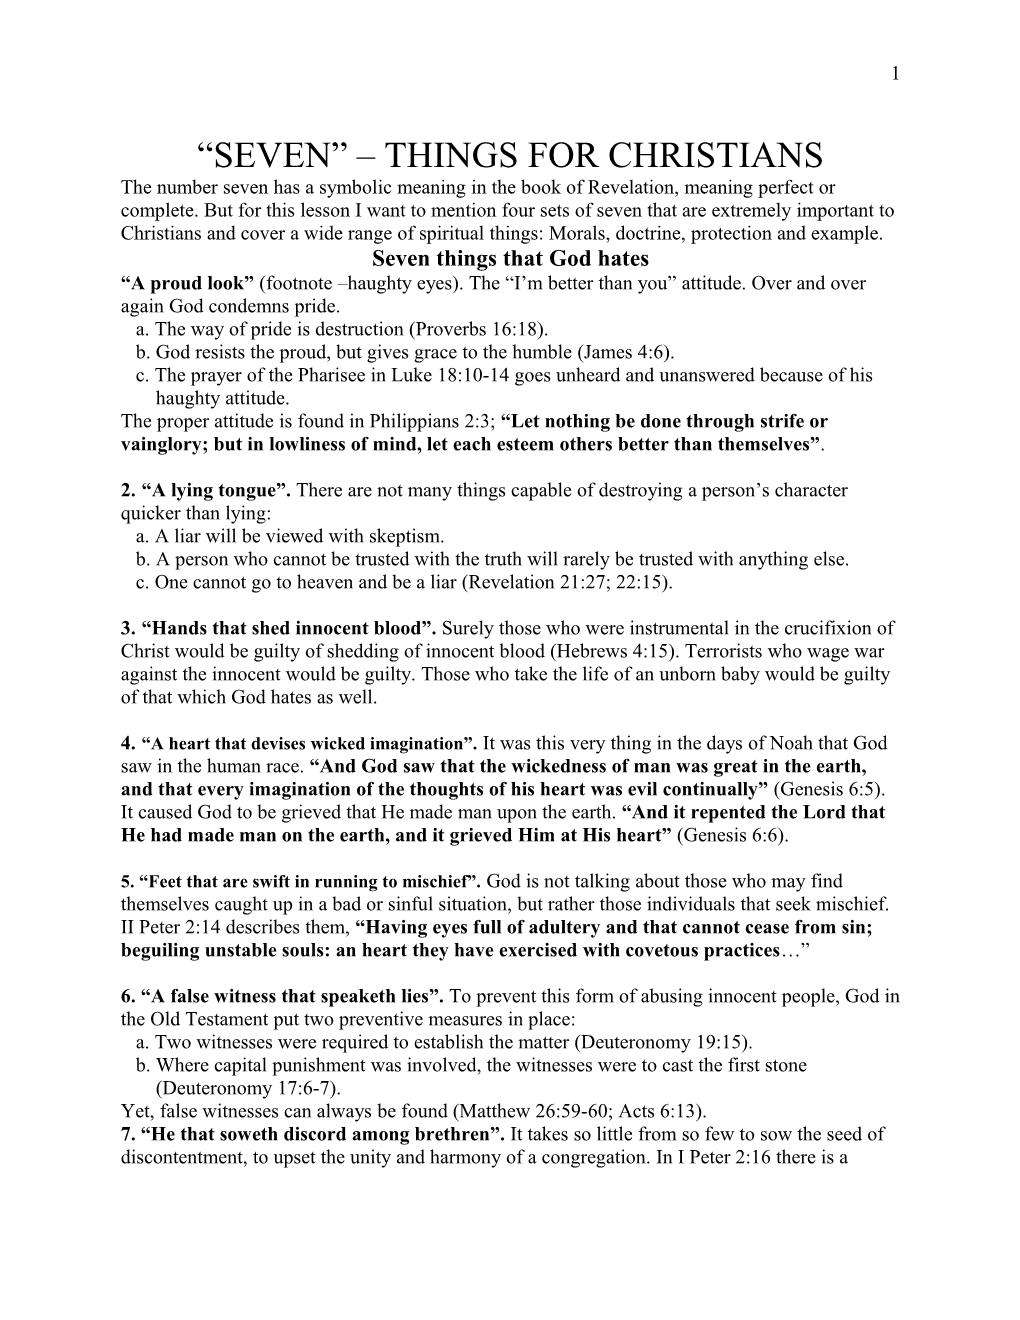 Seven Things for Christians